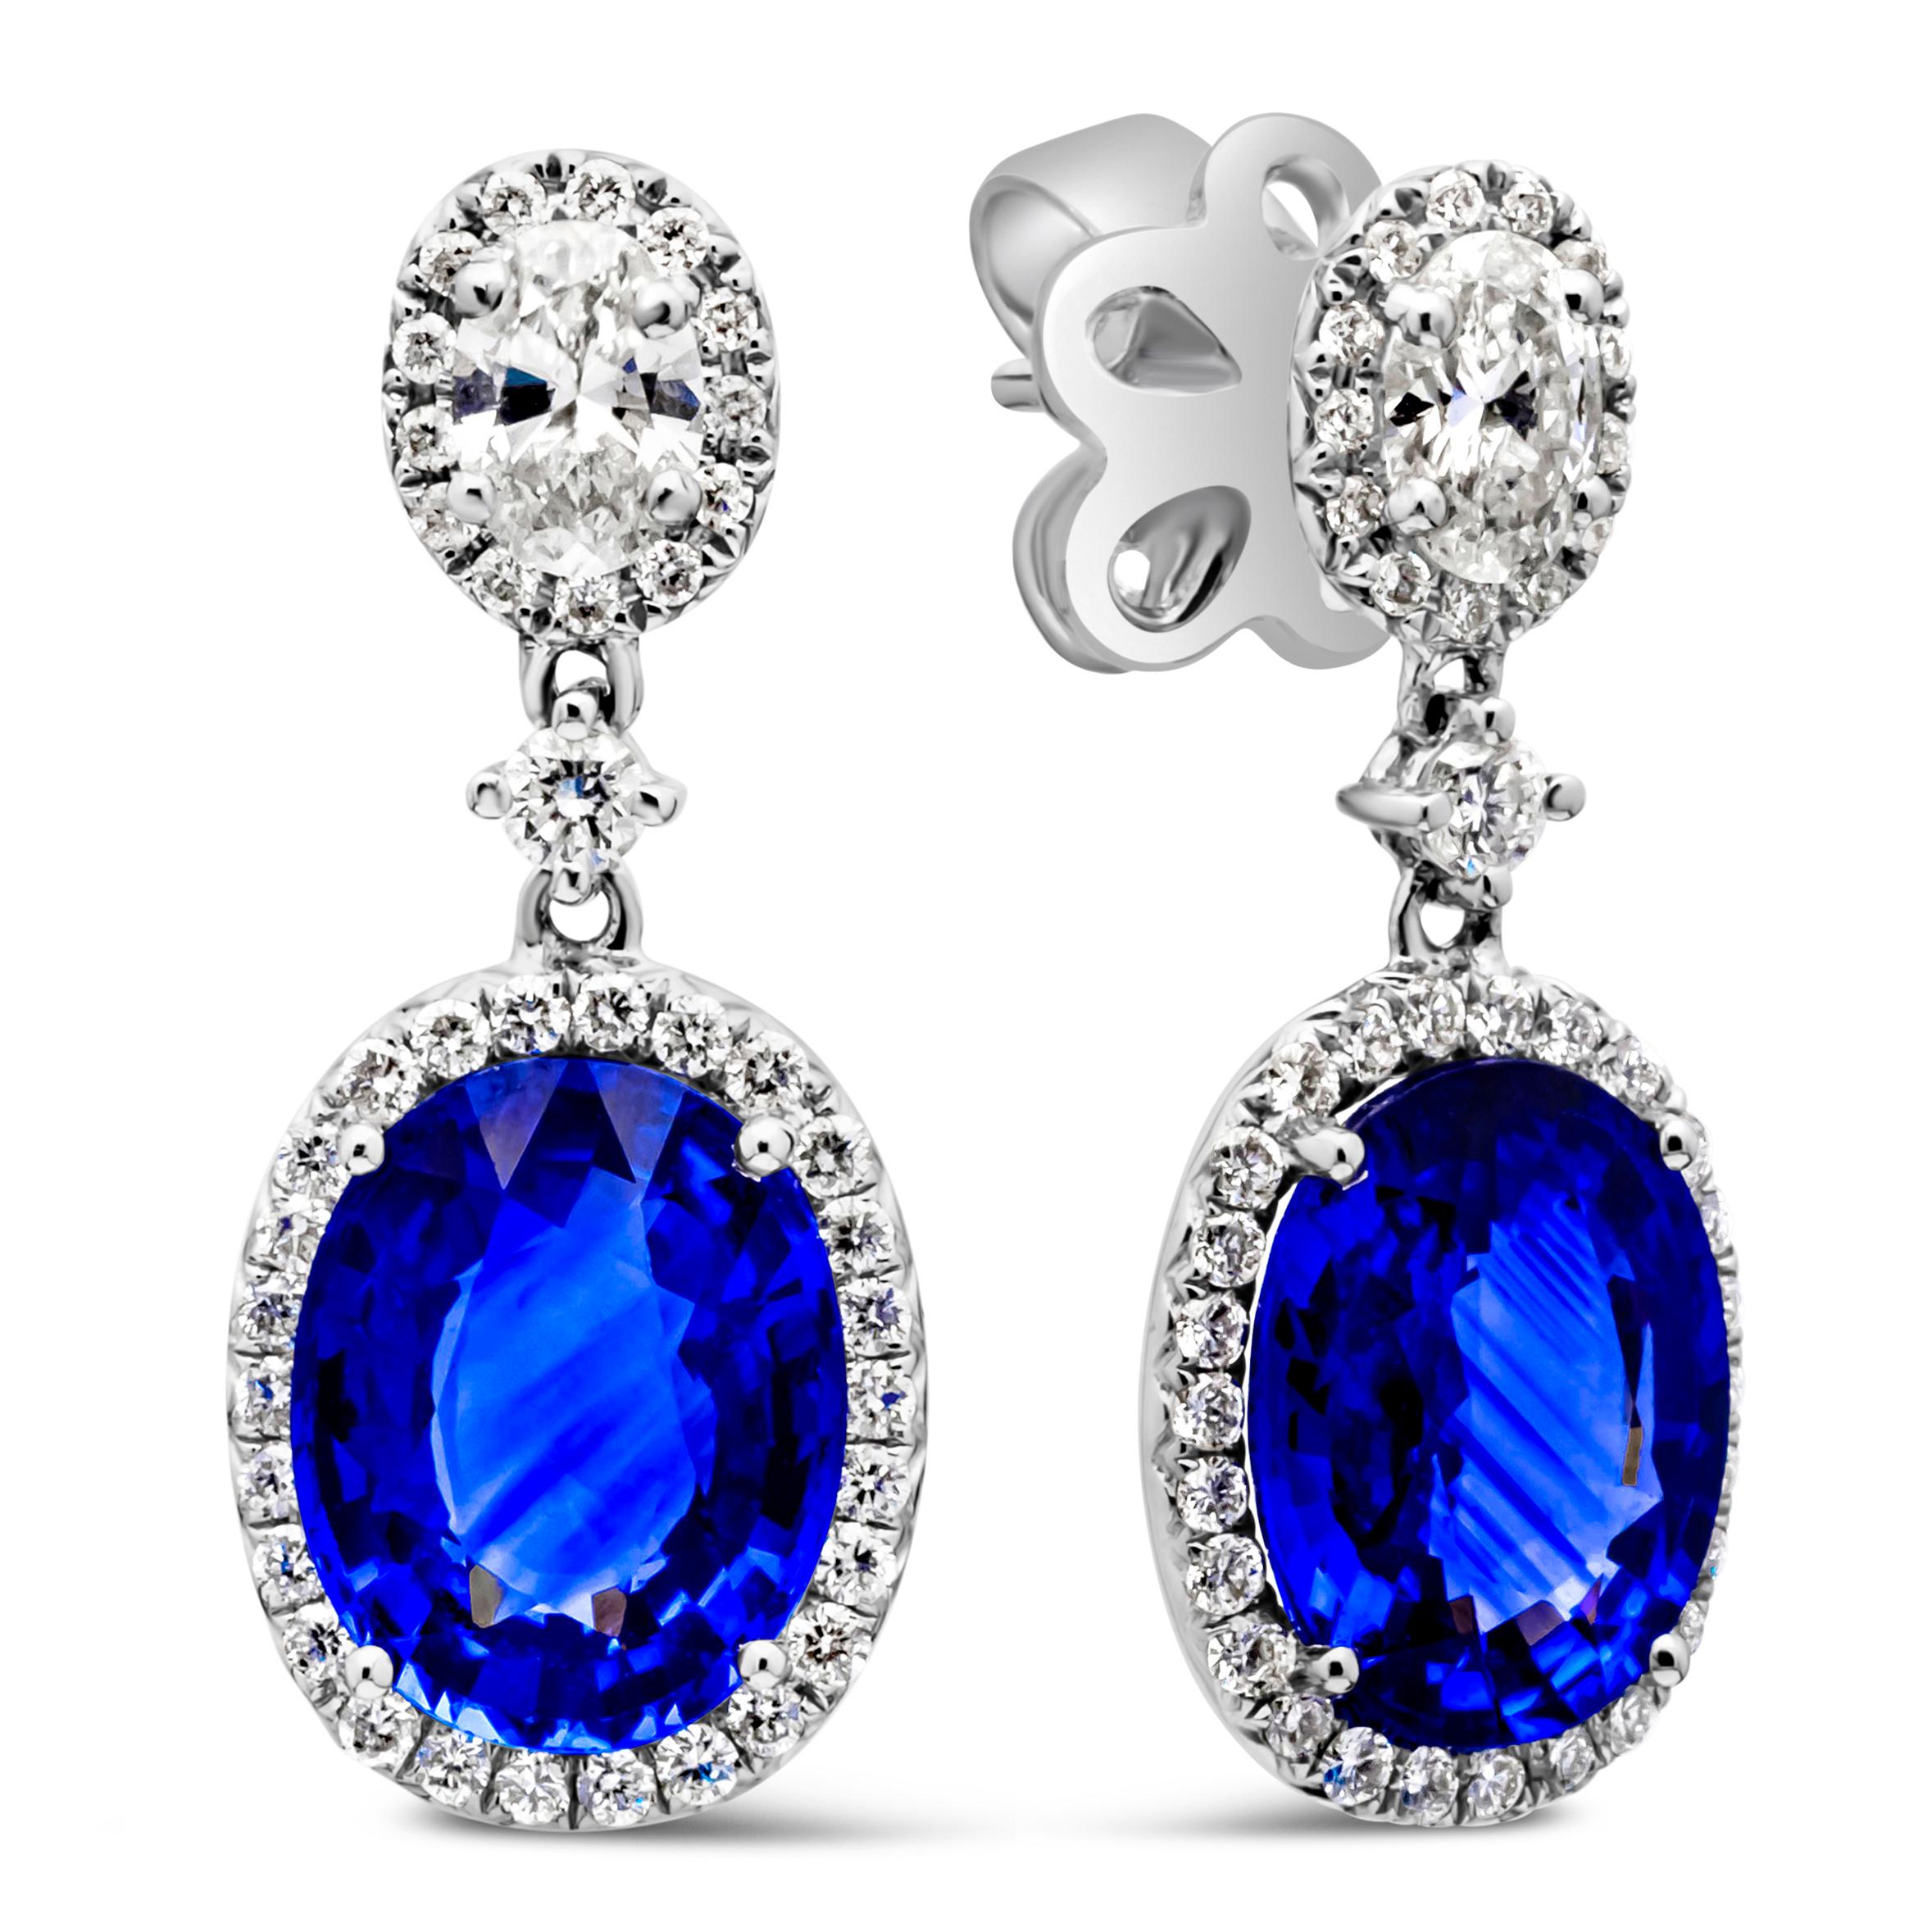 A beautiful and vibrant dangle earrings showcasing a color-rich blue sapphire weighing 4.38 carats total, elegantly set in a halo design with brilliant round diamonds. Suspended on an oval cut diamond halo and spaced with a round diamond, set in a